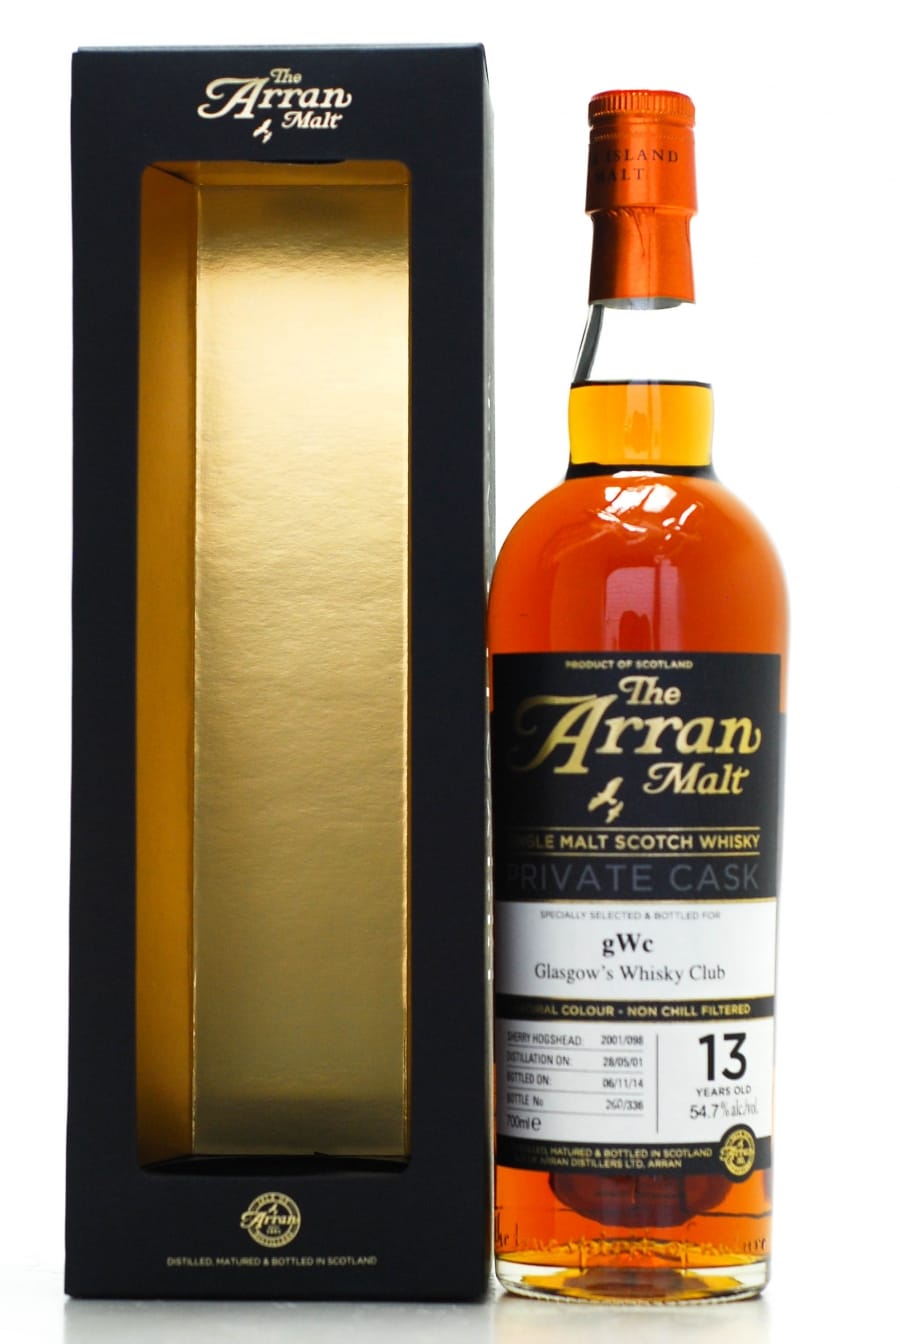 Arran - 13 Years Old Private Cask Bottled For gWc Glasgow's Whisky Club Cask 2001/098 54.7% 2001 In Original Container